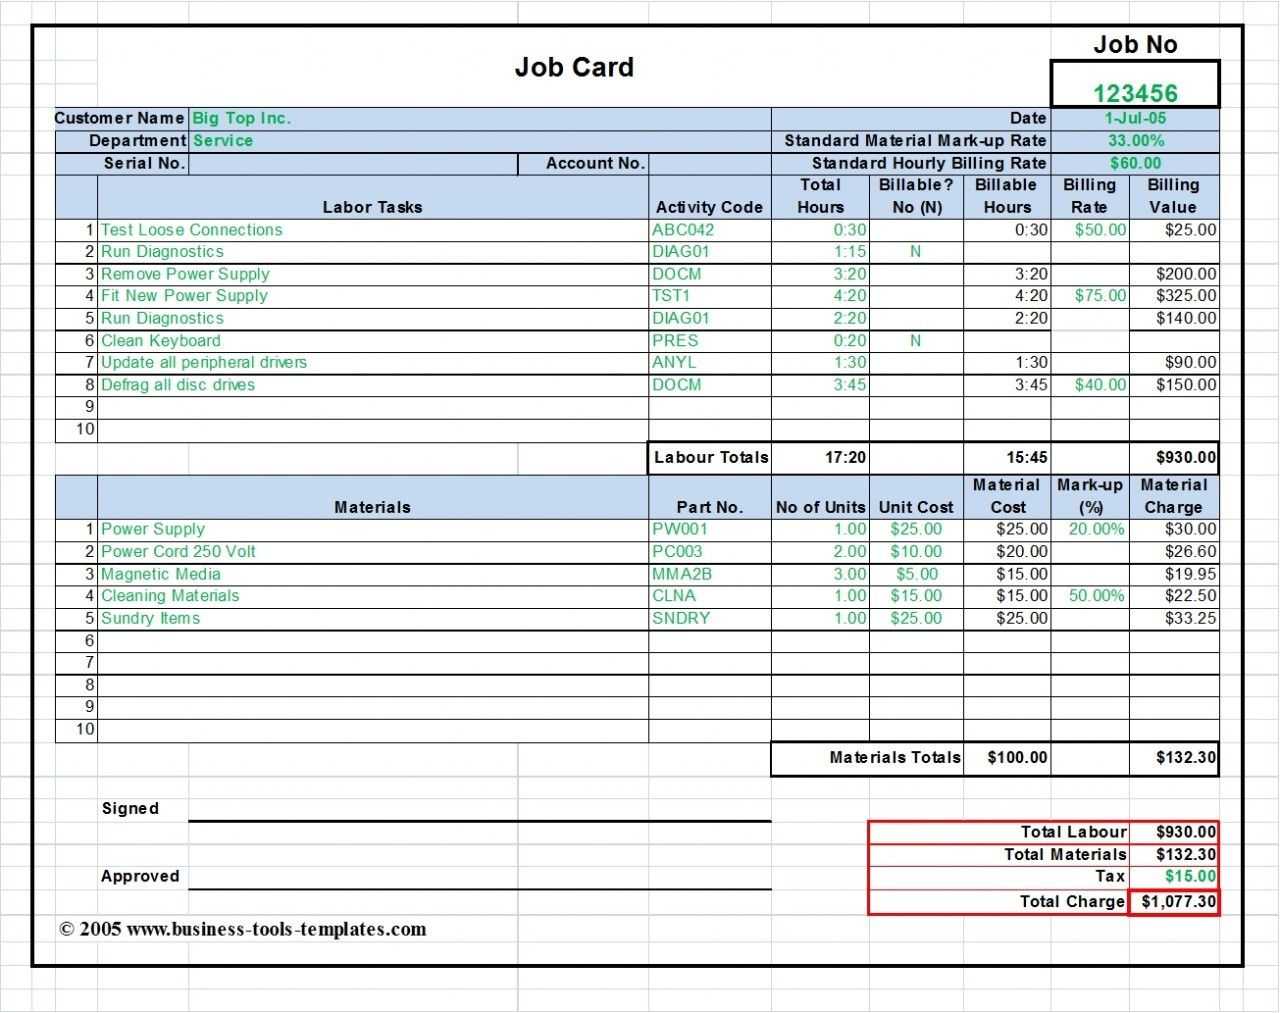 Workshop Job Card Template Excel, Labor & Material Cost Within Sample Job Cards Templates